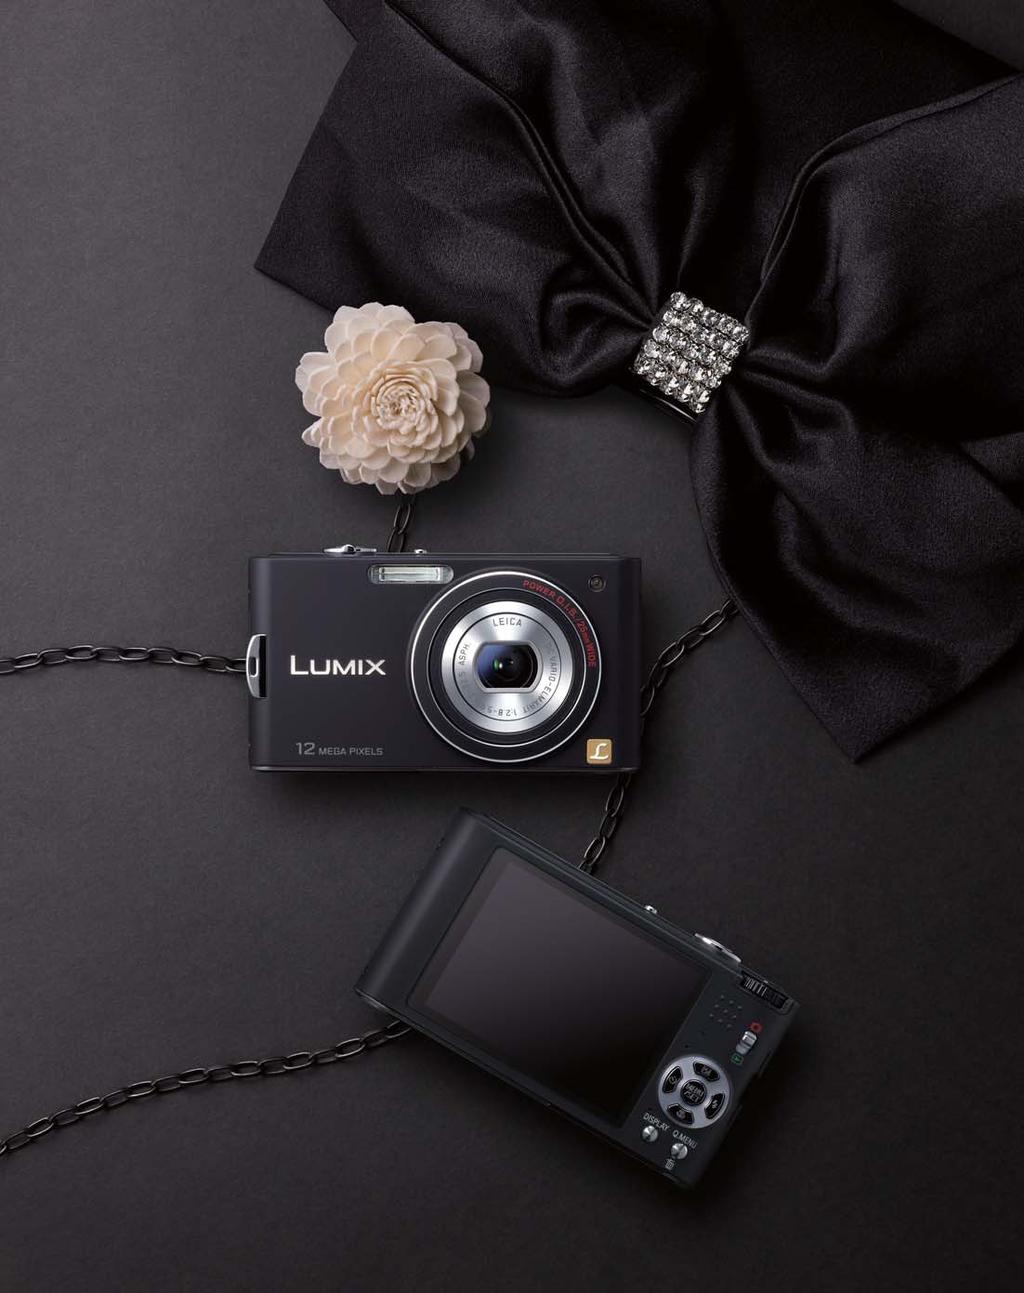 NEW FX65 2x nighttime beauty. With a stylish 25mm wide-angle lens and POWER O.I.S.